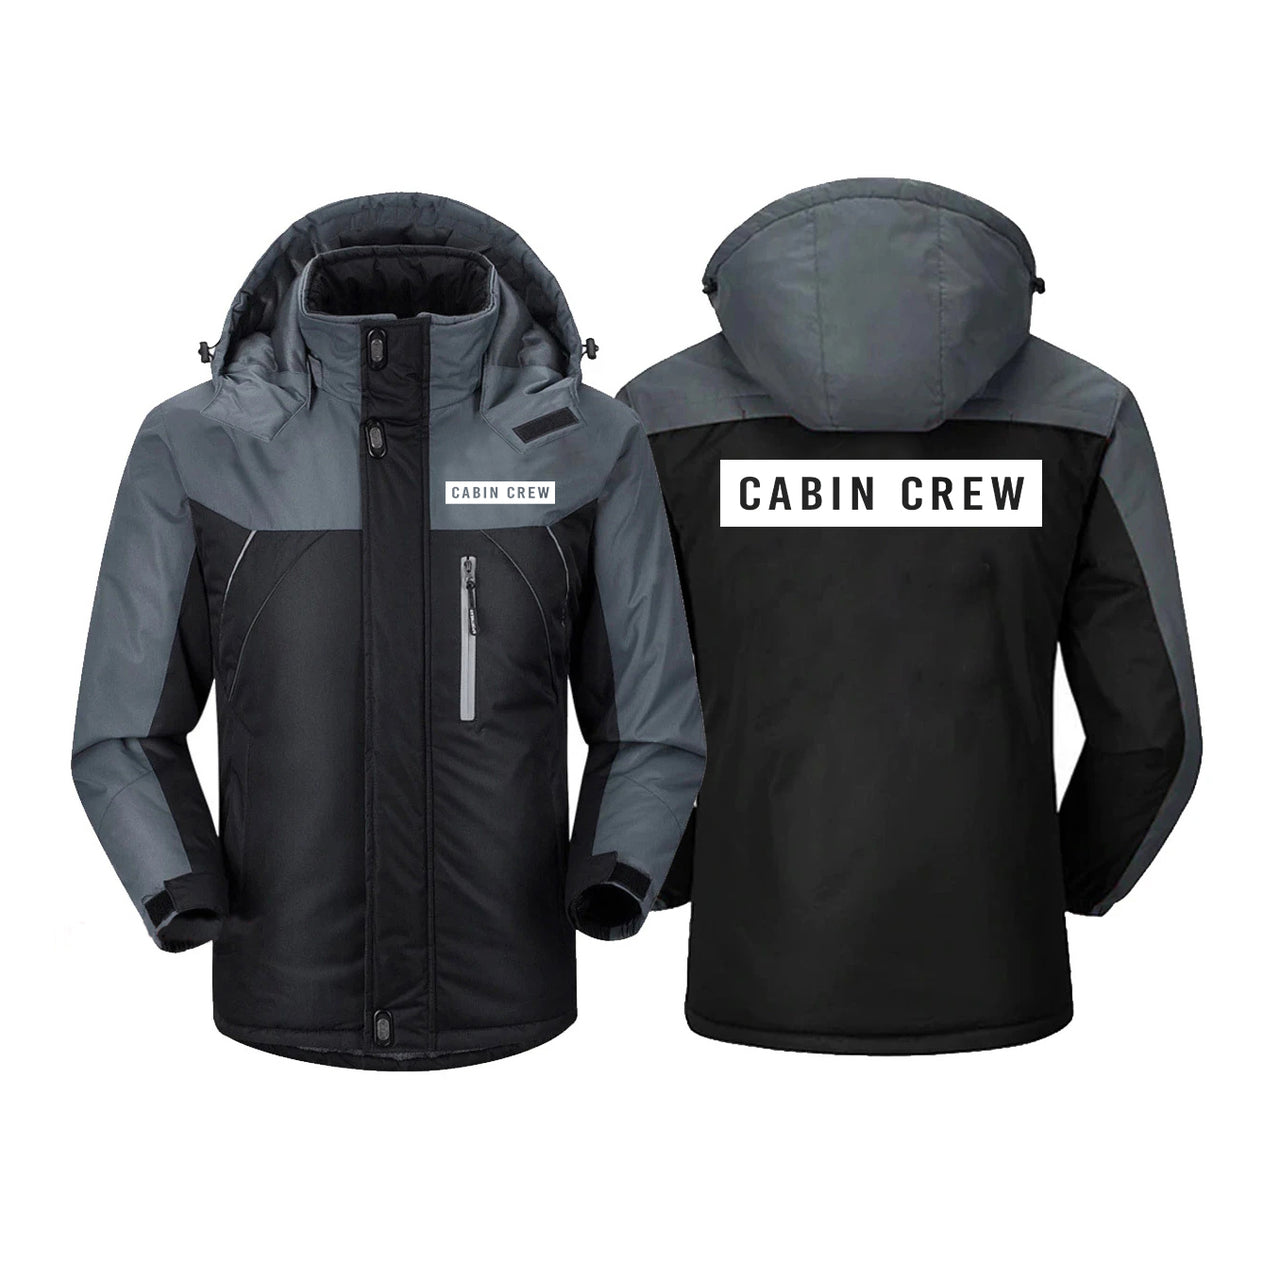 Cabin Crew Text Designed Thick Winter Jackets